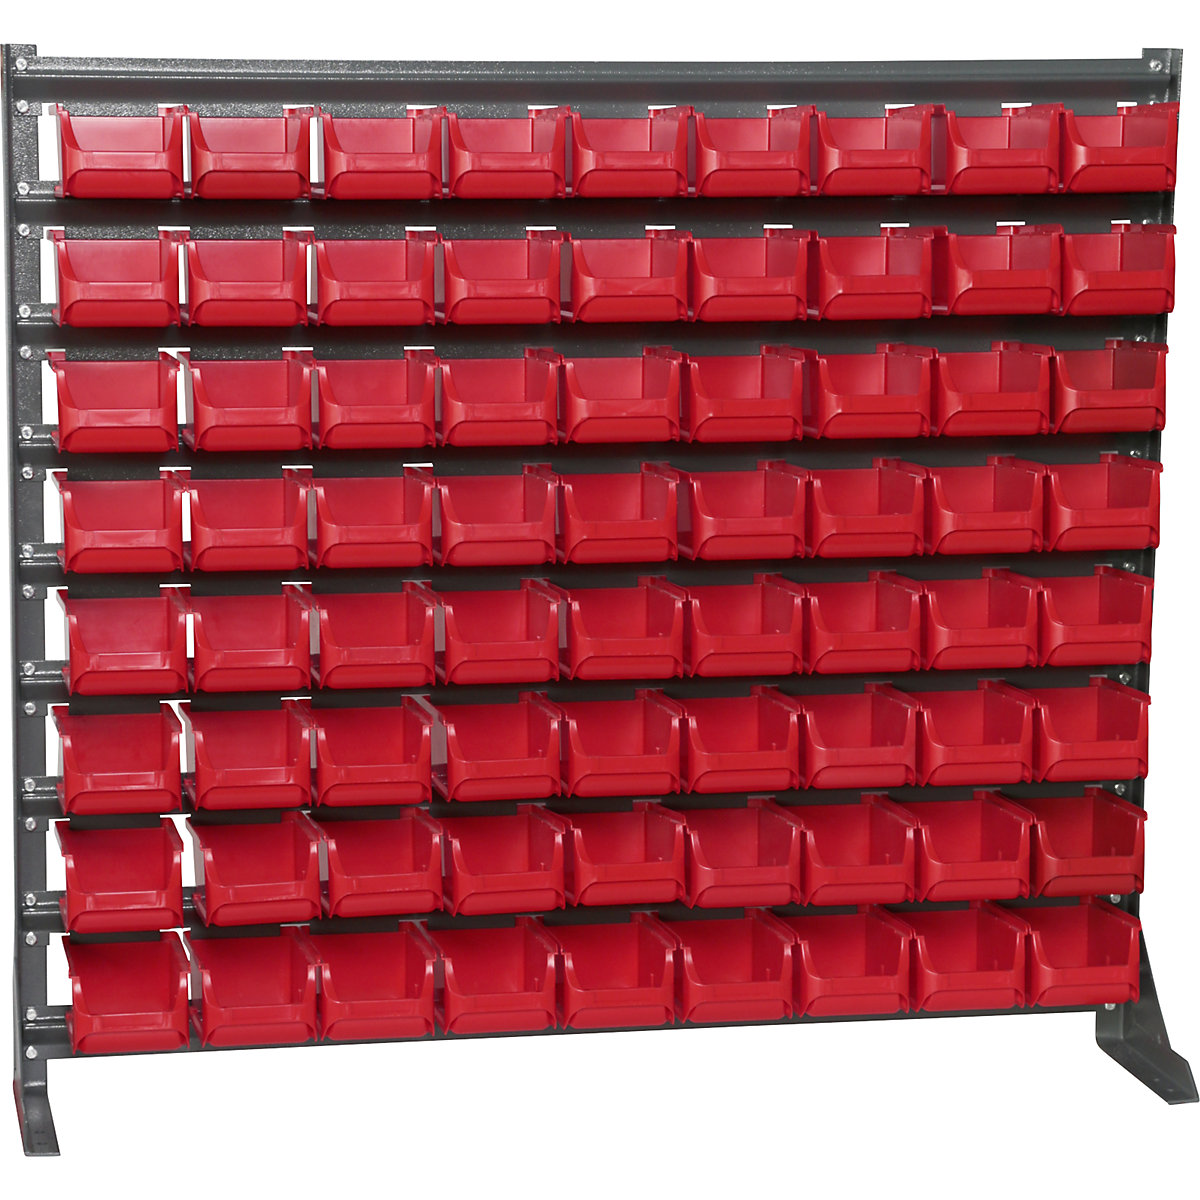 Small parts shelf unit, width 1020 mm, with open fronted storage bins, HxD 900 x 200 mm-6